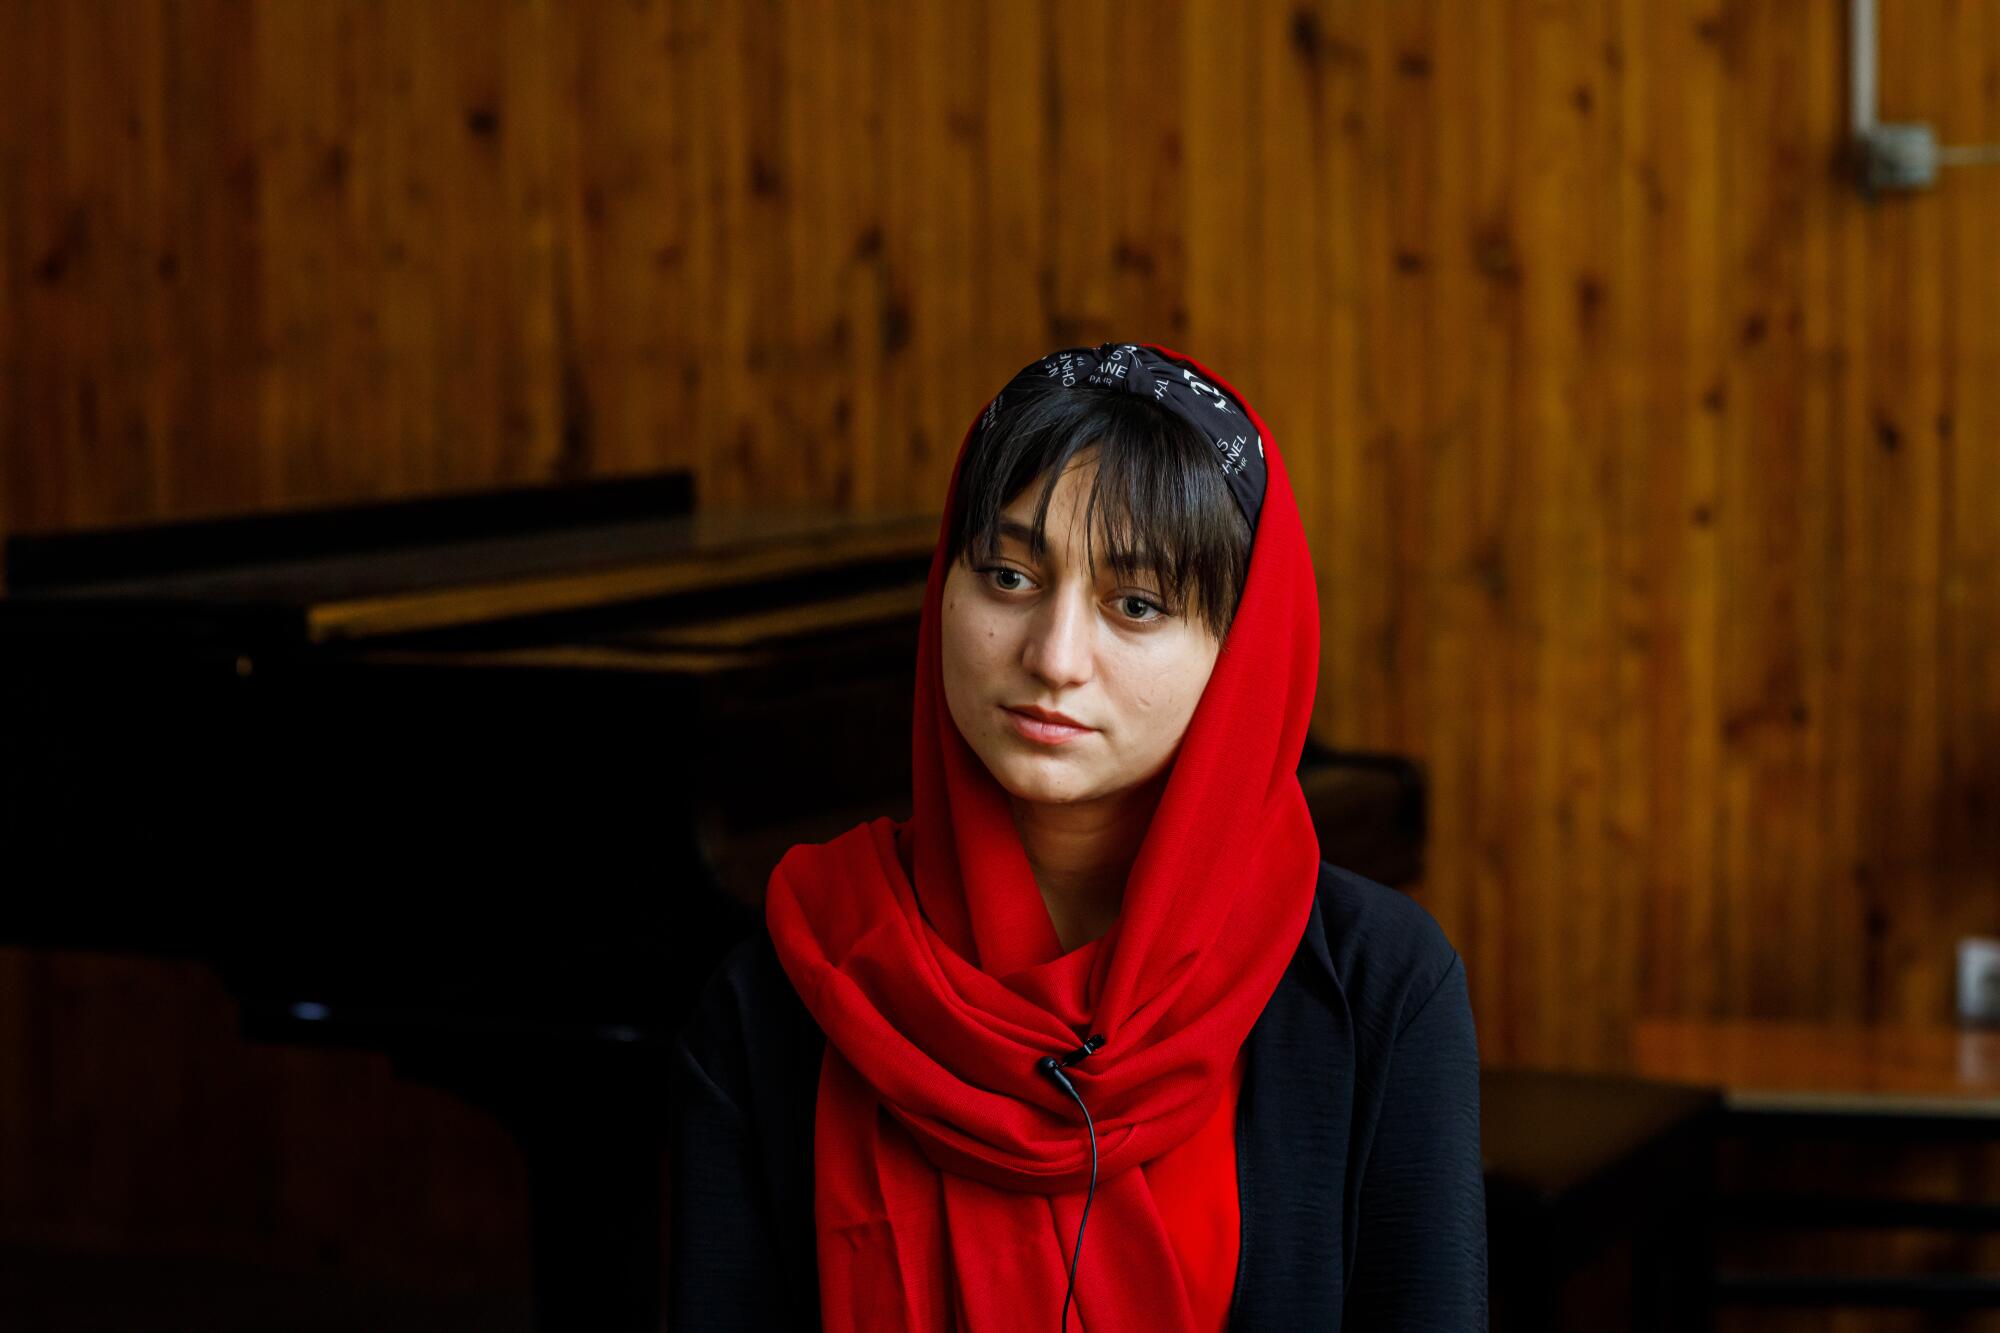 A young female musician wearing red and black.